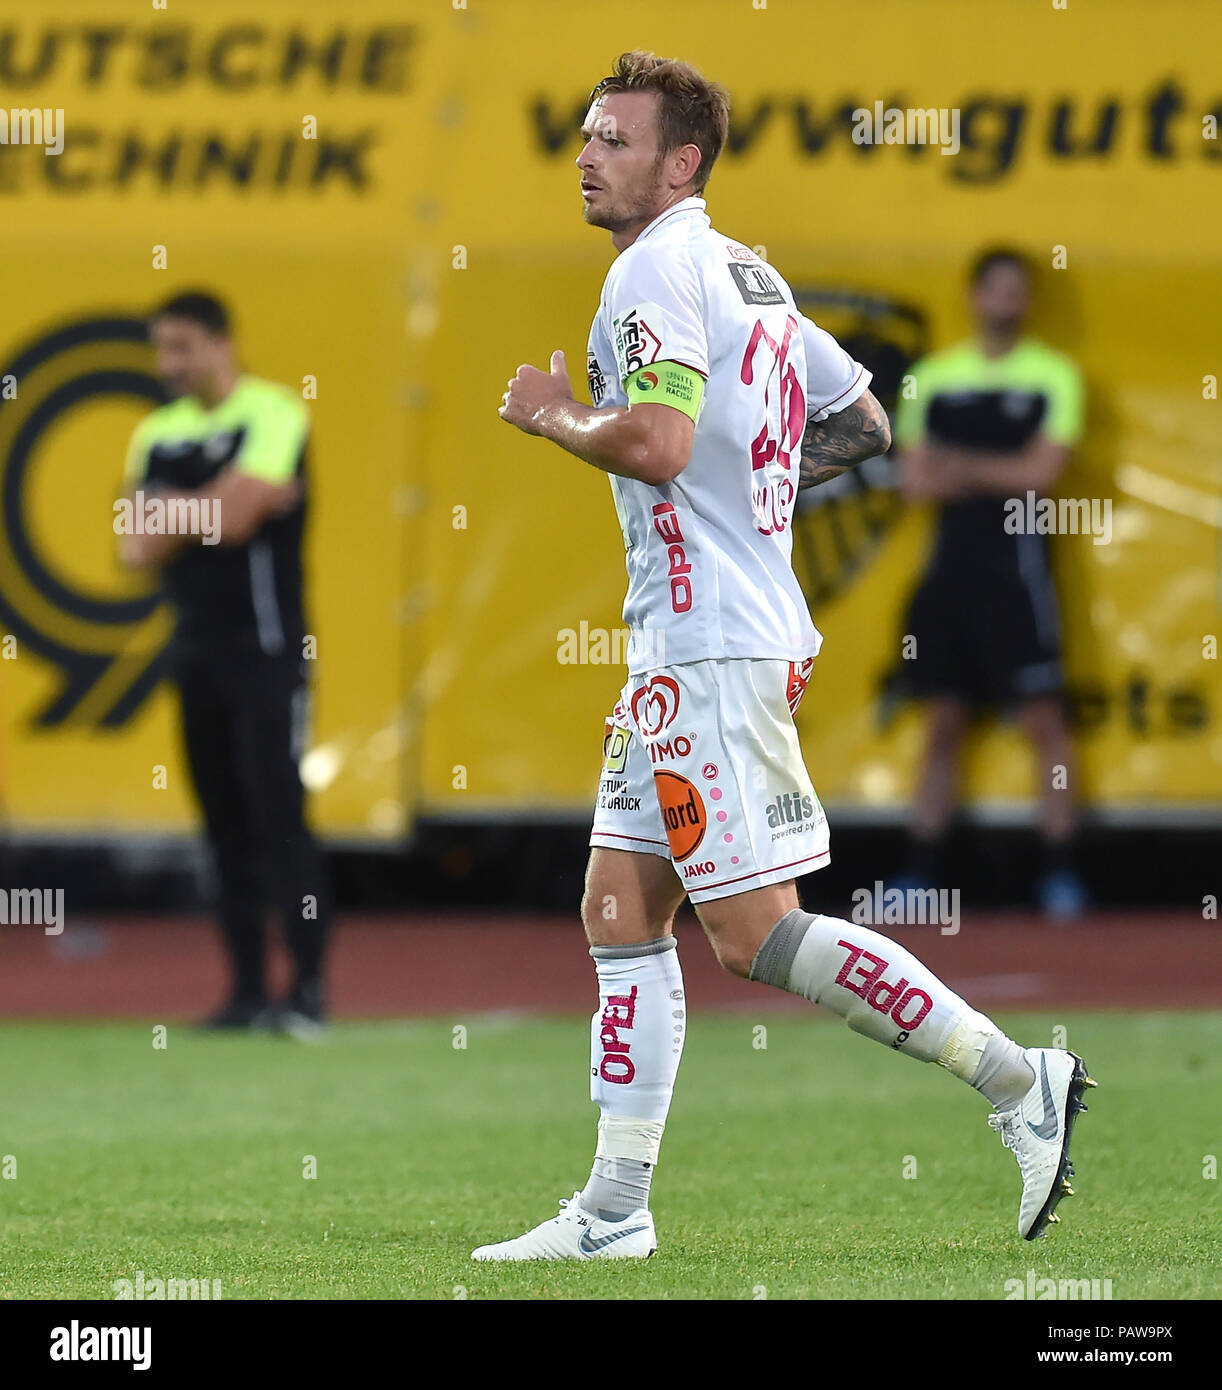 Wolfsberger, Austria, 24 July 2018. WAC's Saollbauer looks on during the pre season friendly football match between RZ Pellets WAC and Udinese Calcio at Lavanttal Arena. photo Simone Ferraro / Alamy Live News Stock Photo